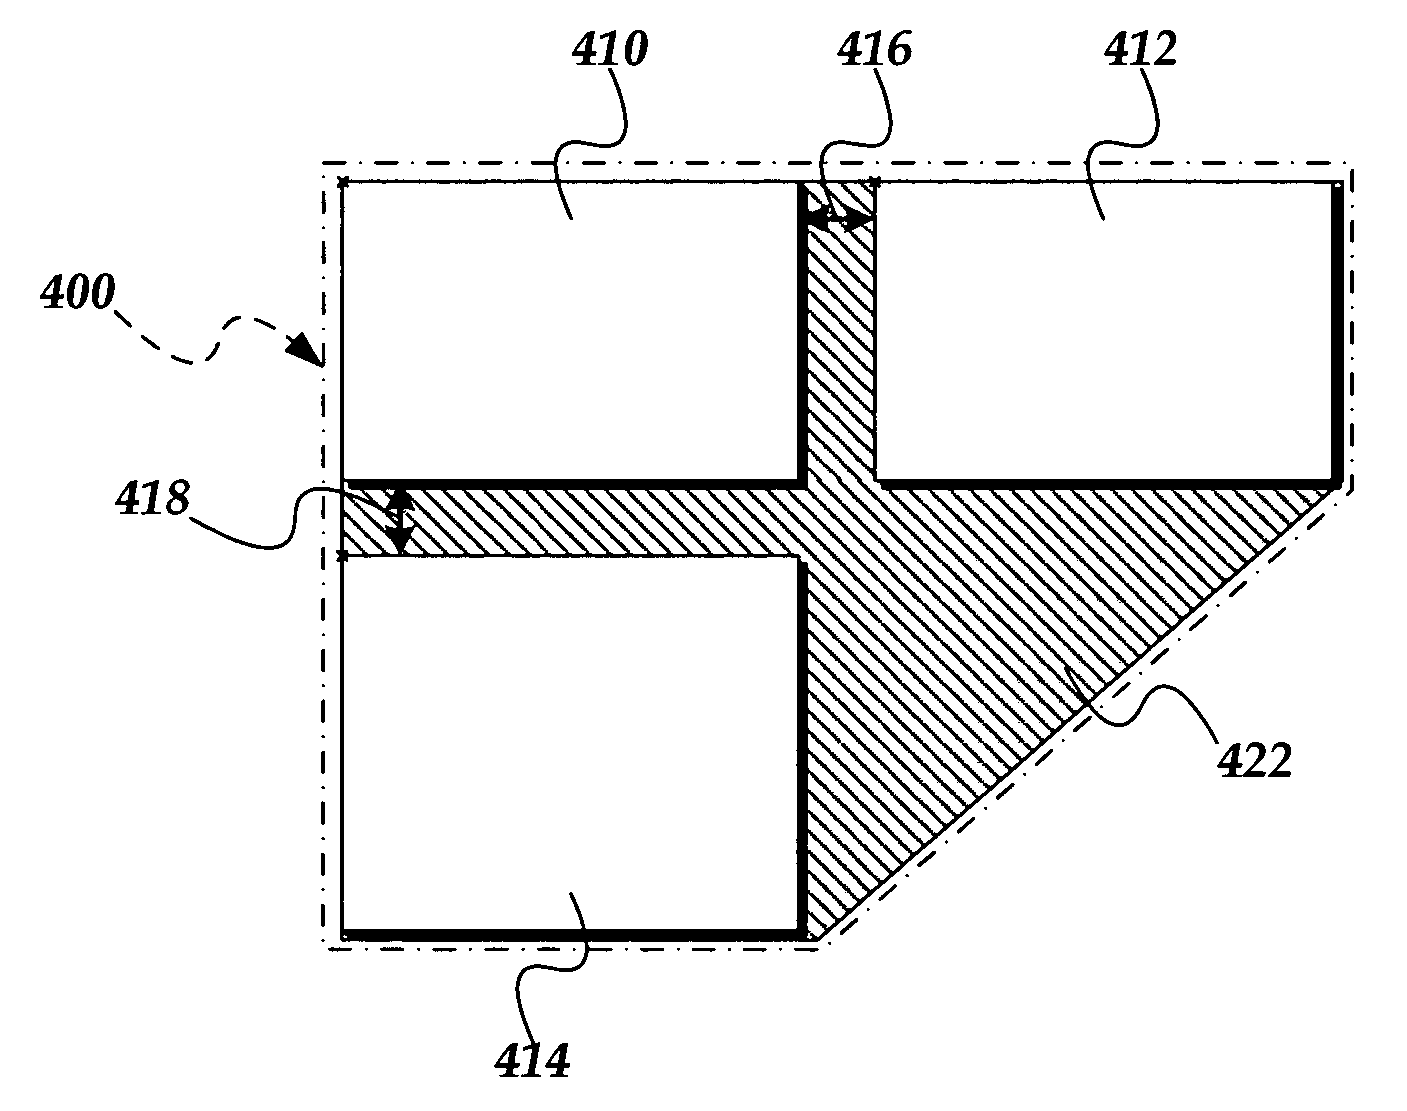 Displaying visually correct pointer movements on a multi-monitor display system